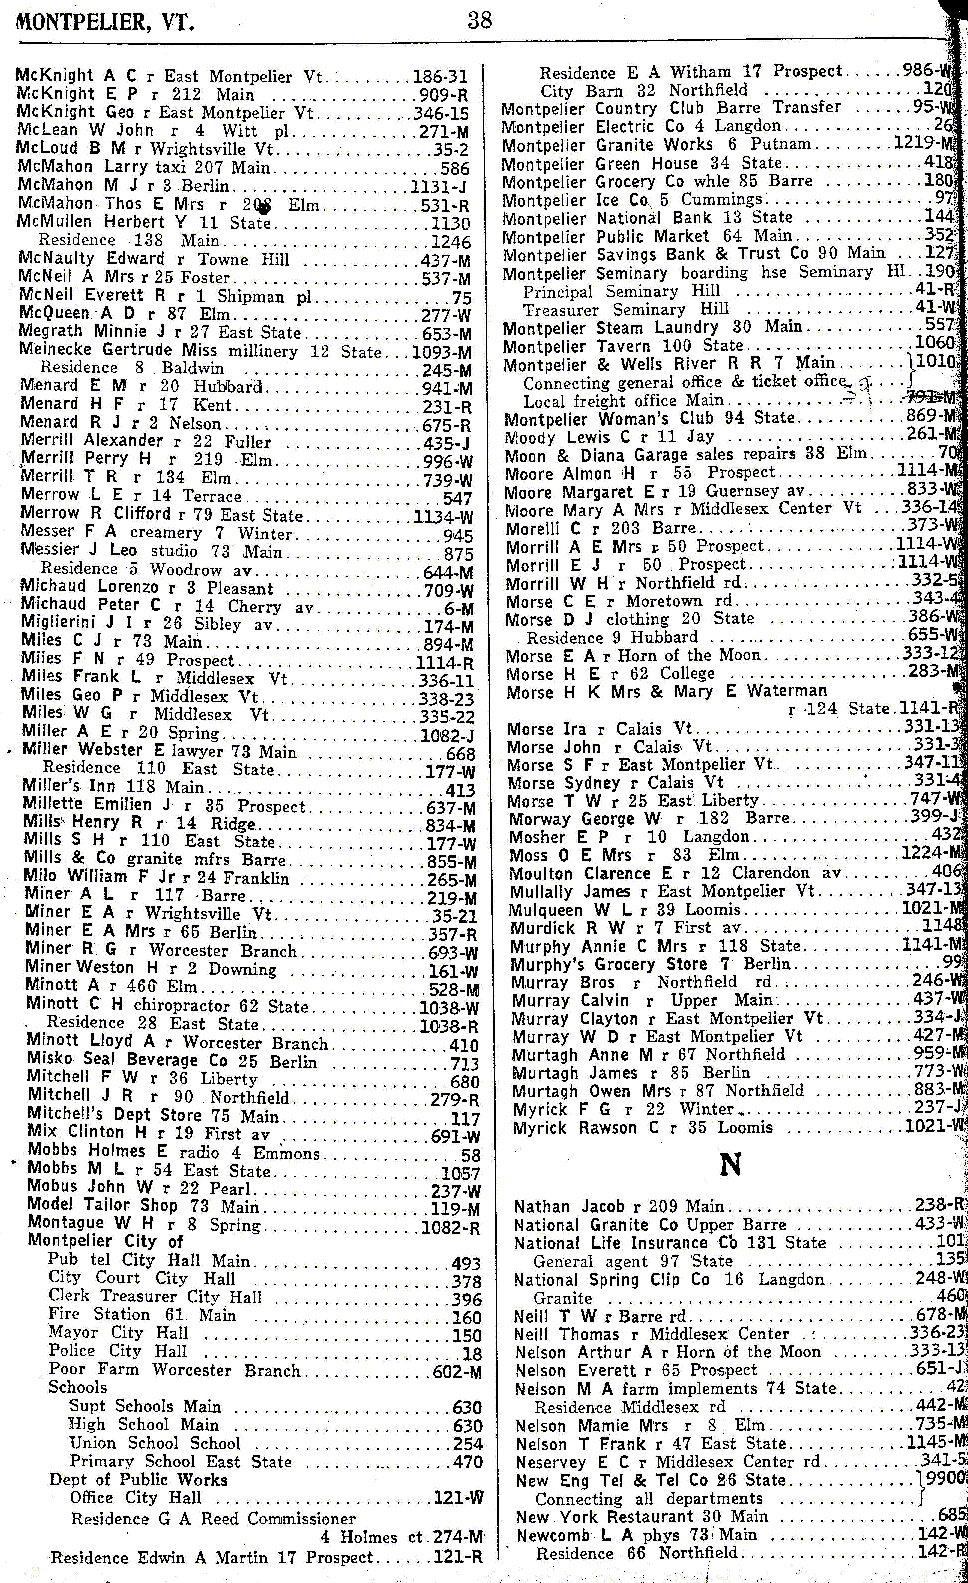 1928 Montpelier Vt Telephone Book - Page 38